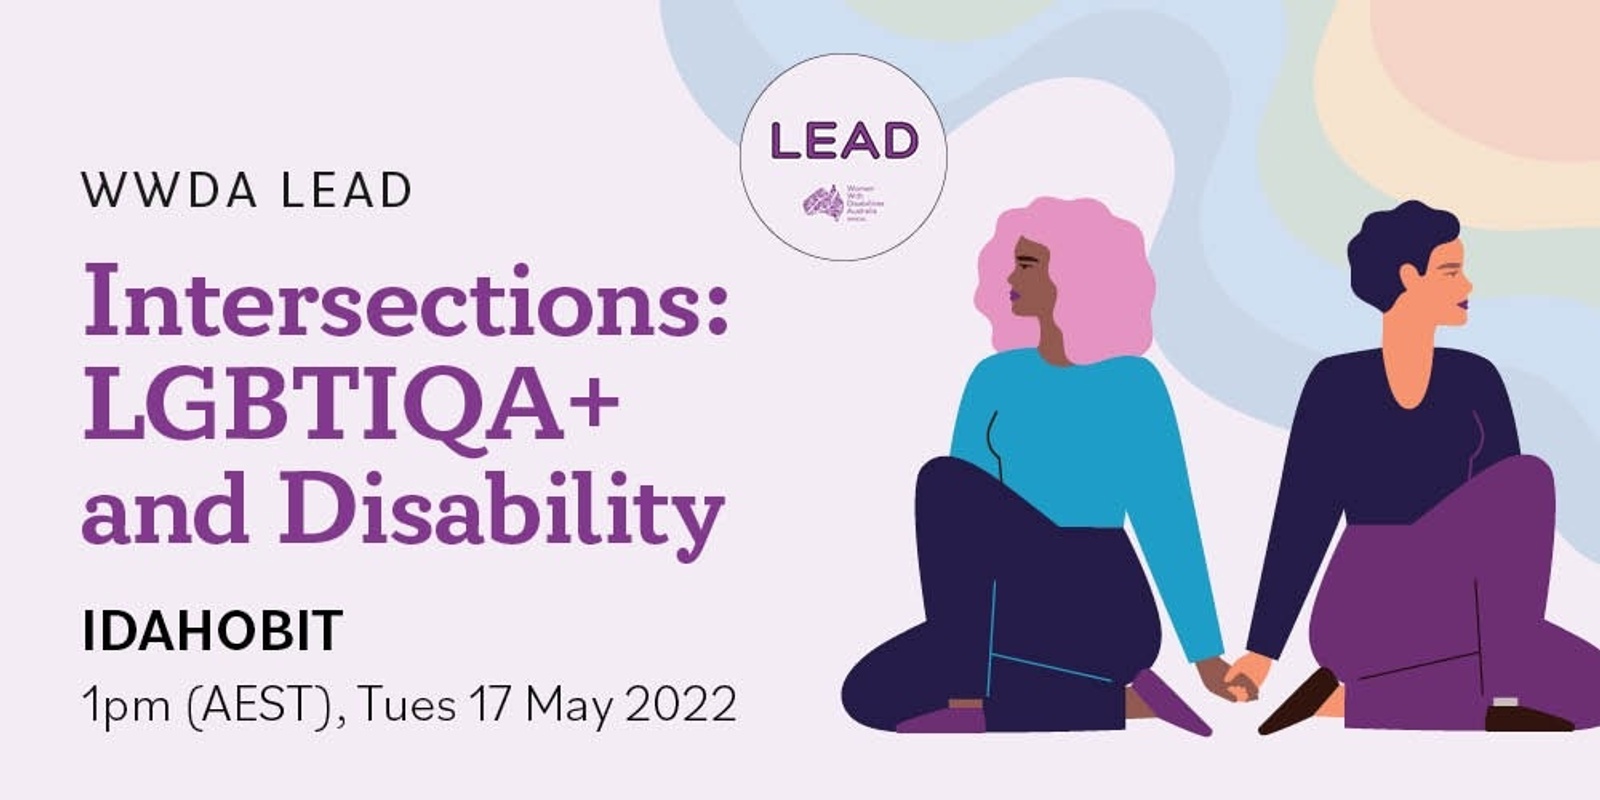 Banner image for WWDA LEAD Intersections: LGBTIQA+ and Disability Webinar